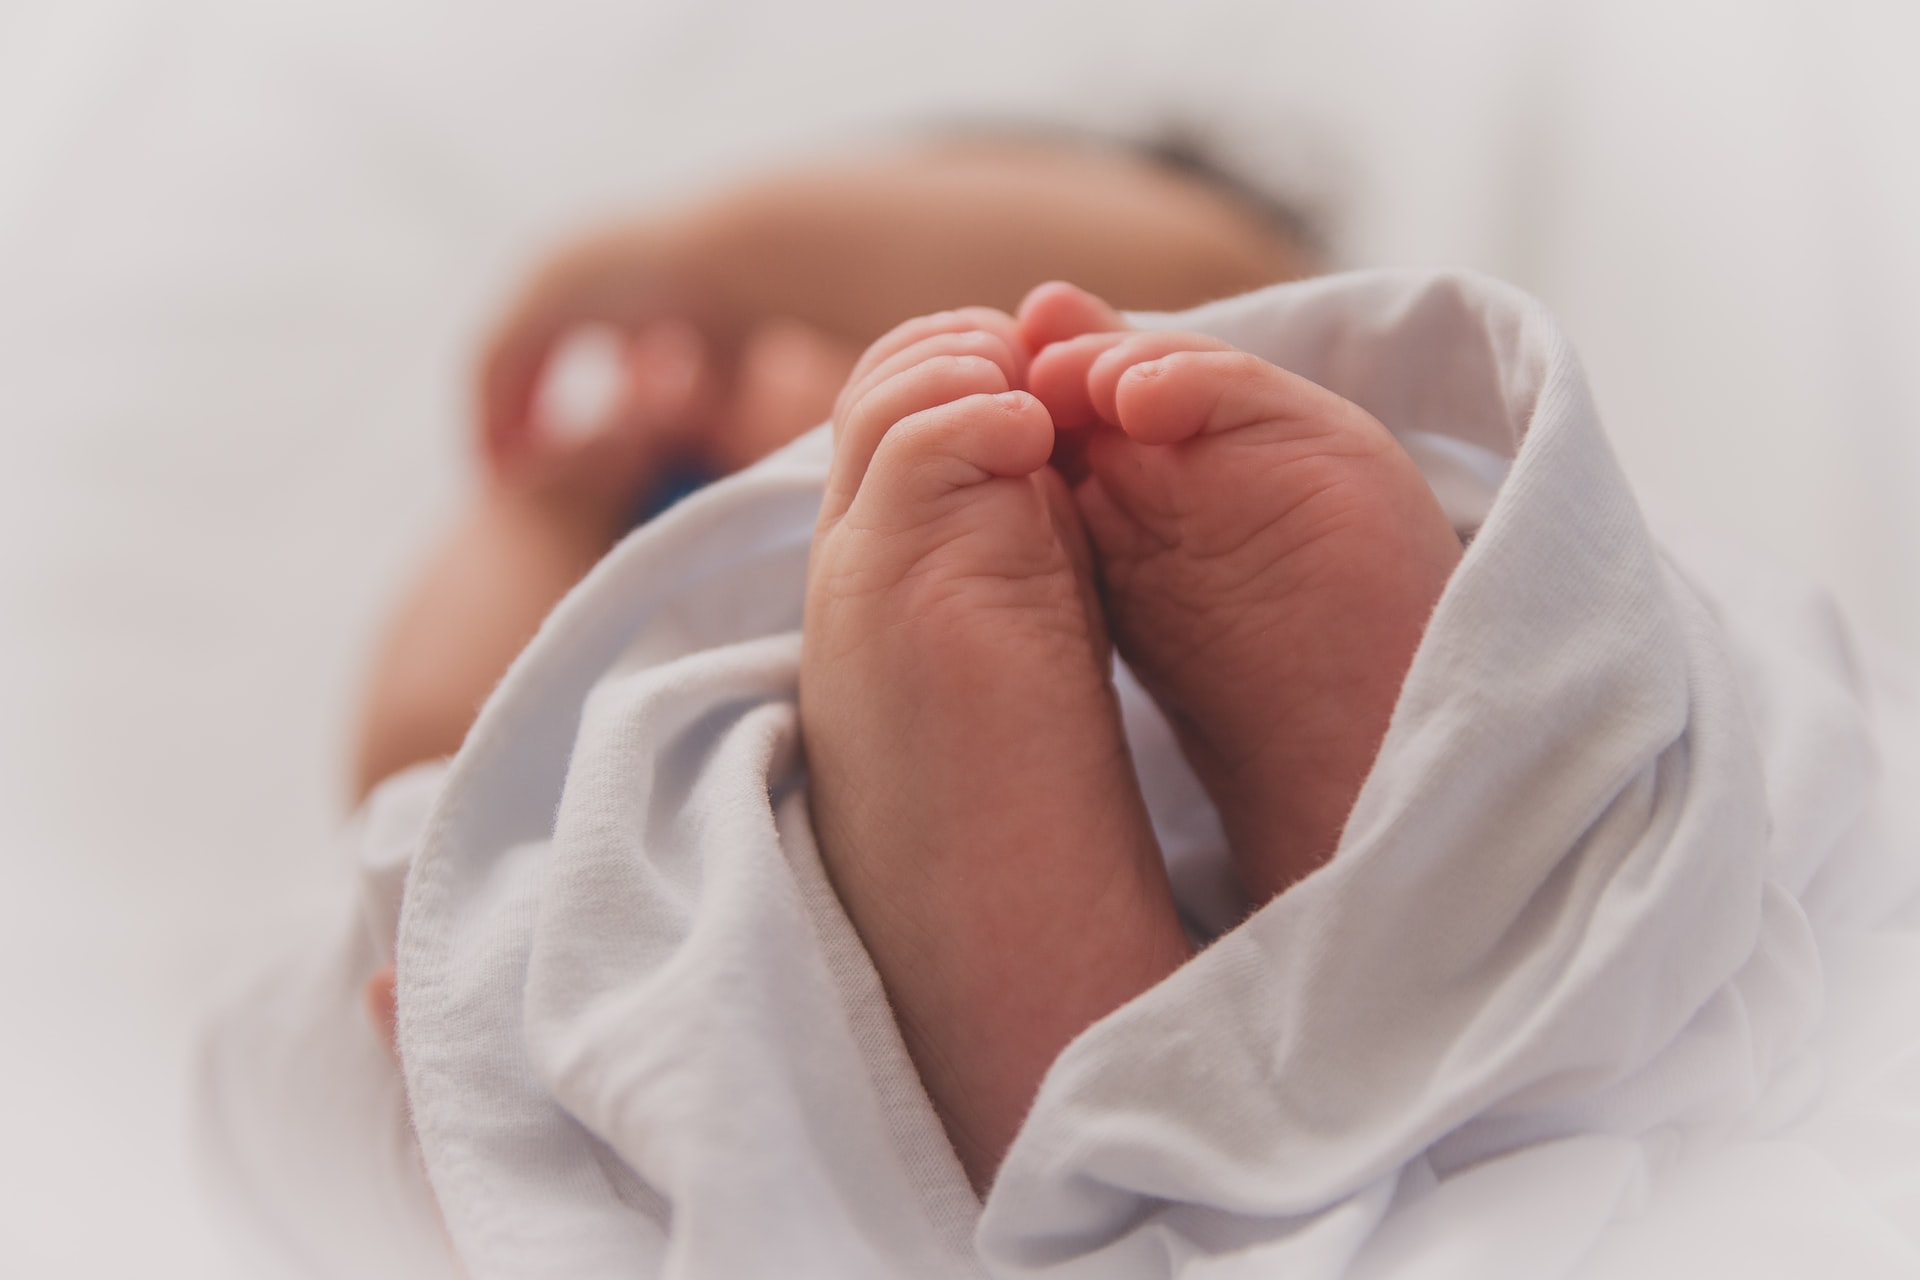 Induced Labor Risks - See Here